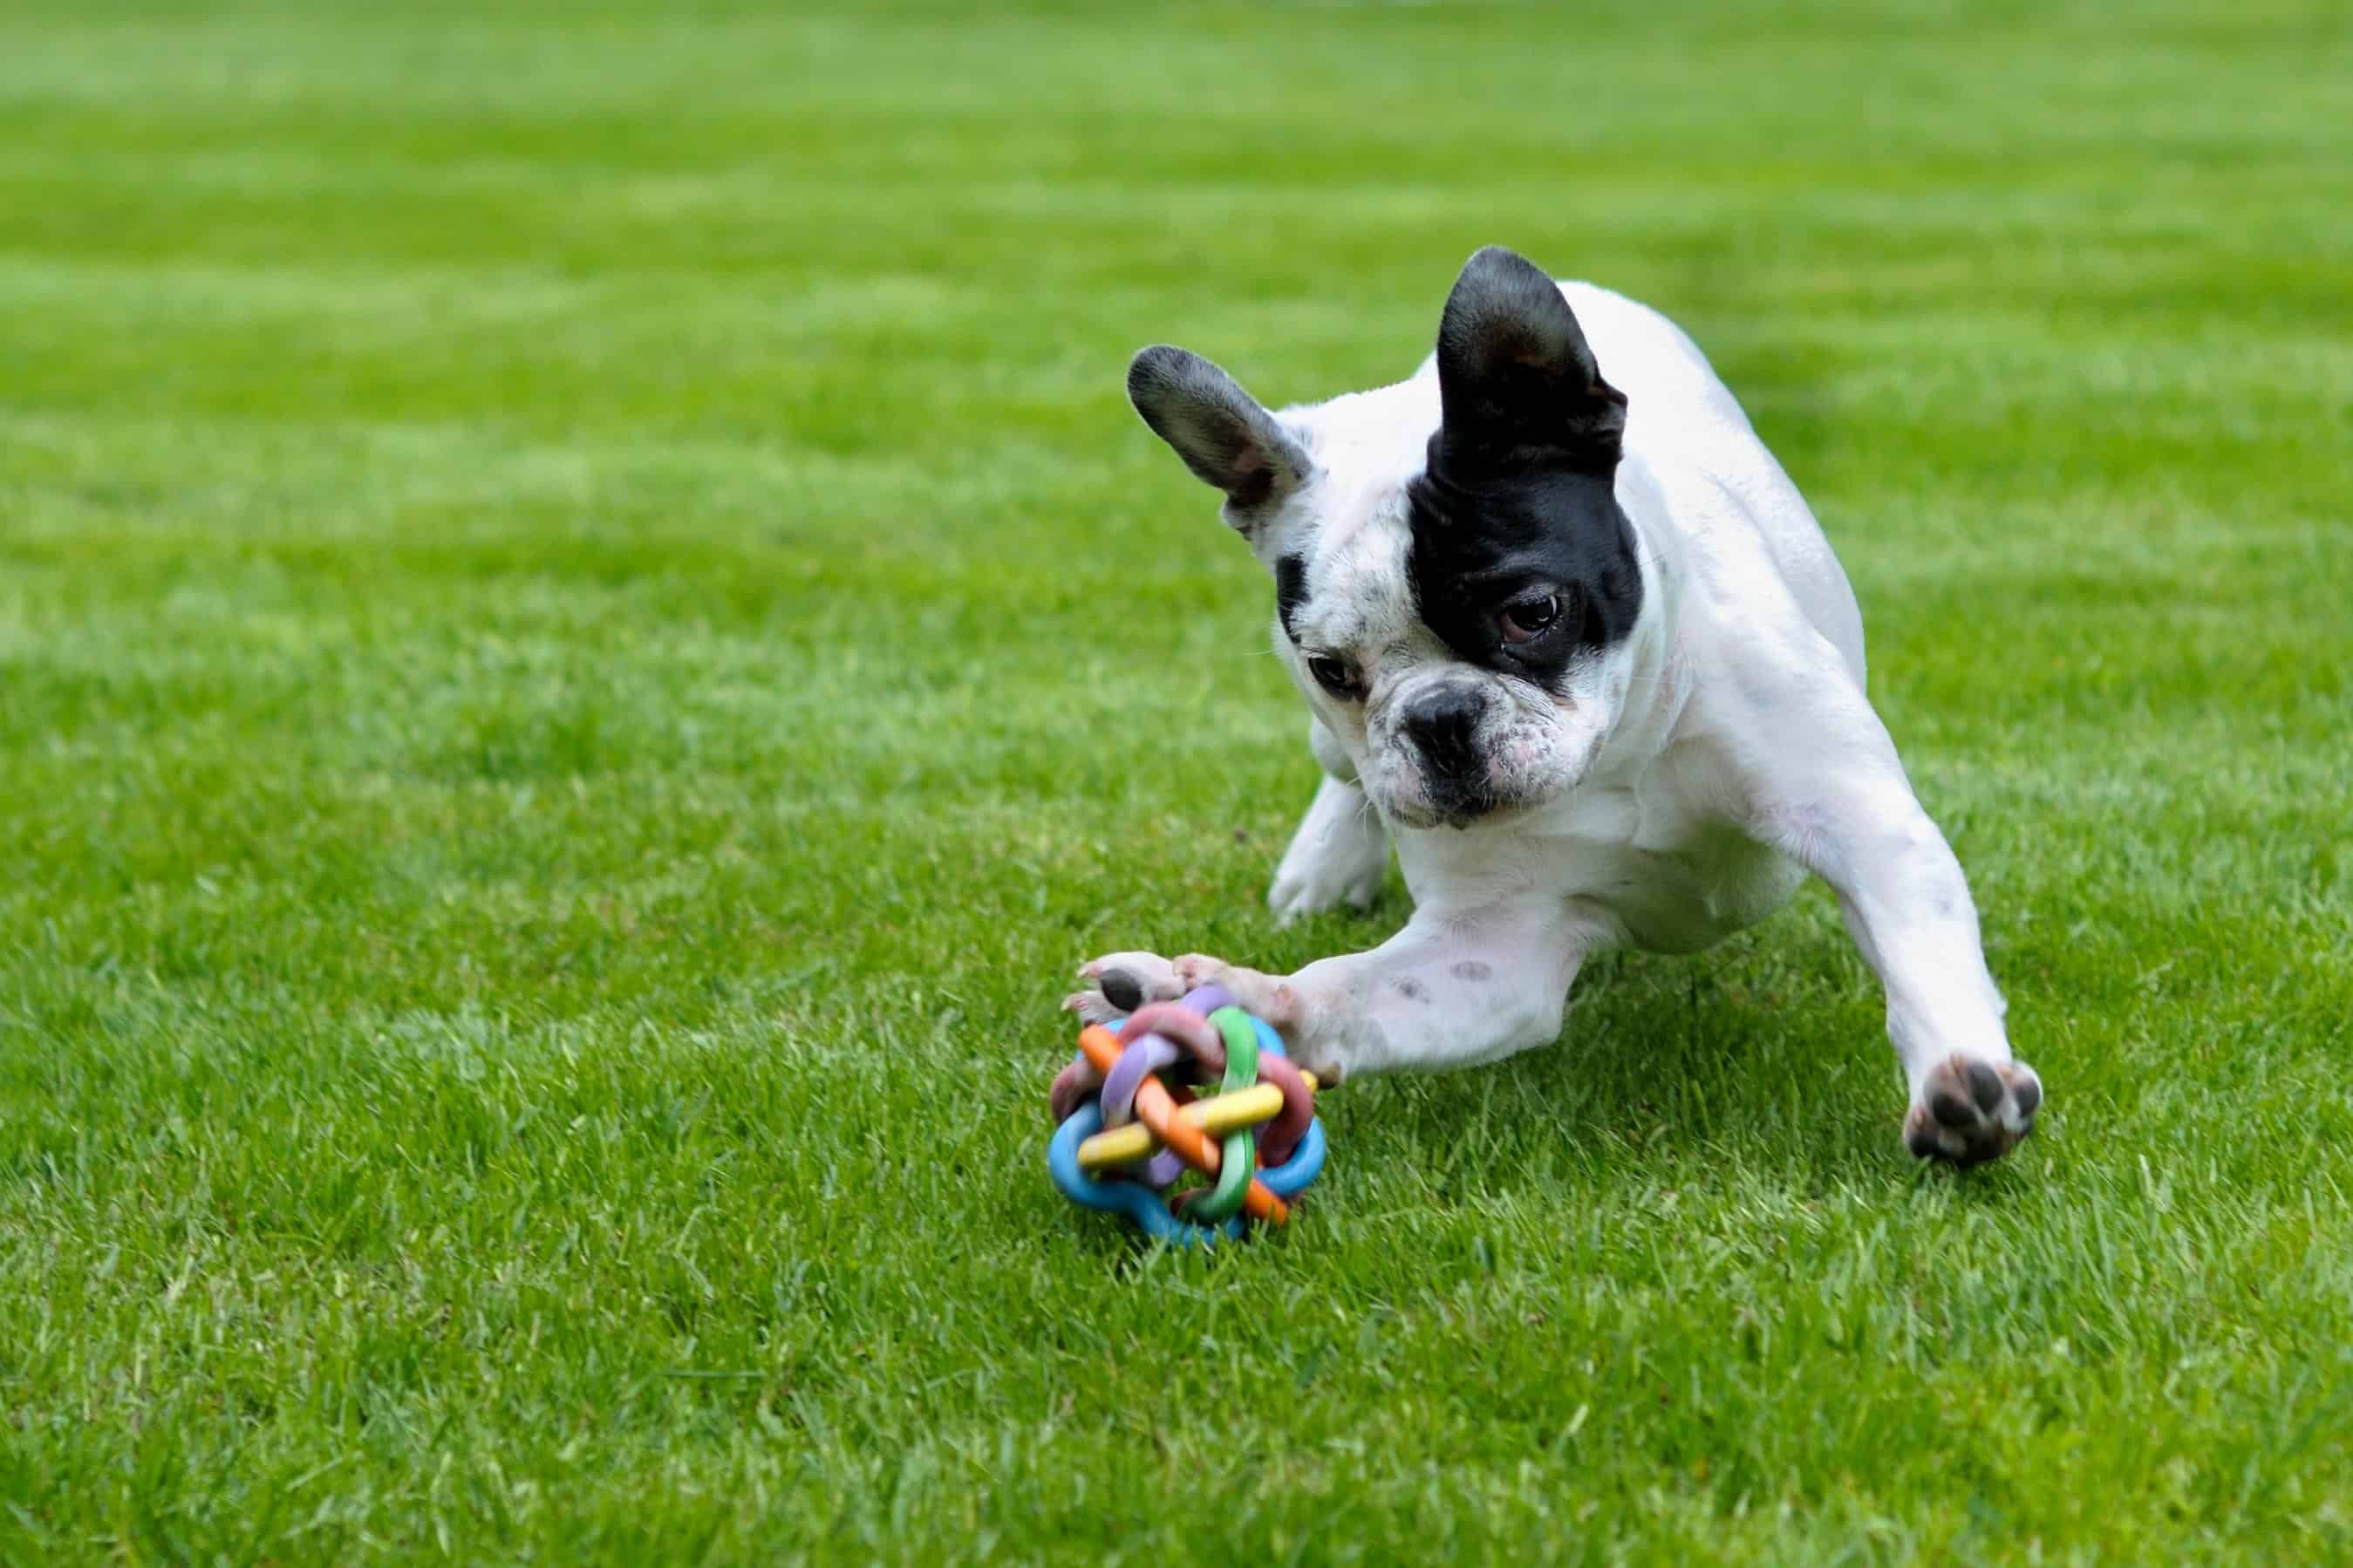 Free picture: field, grass, puppy, lawn, dog, outdoor, playful